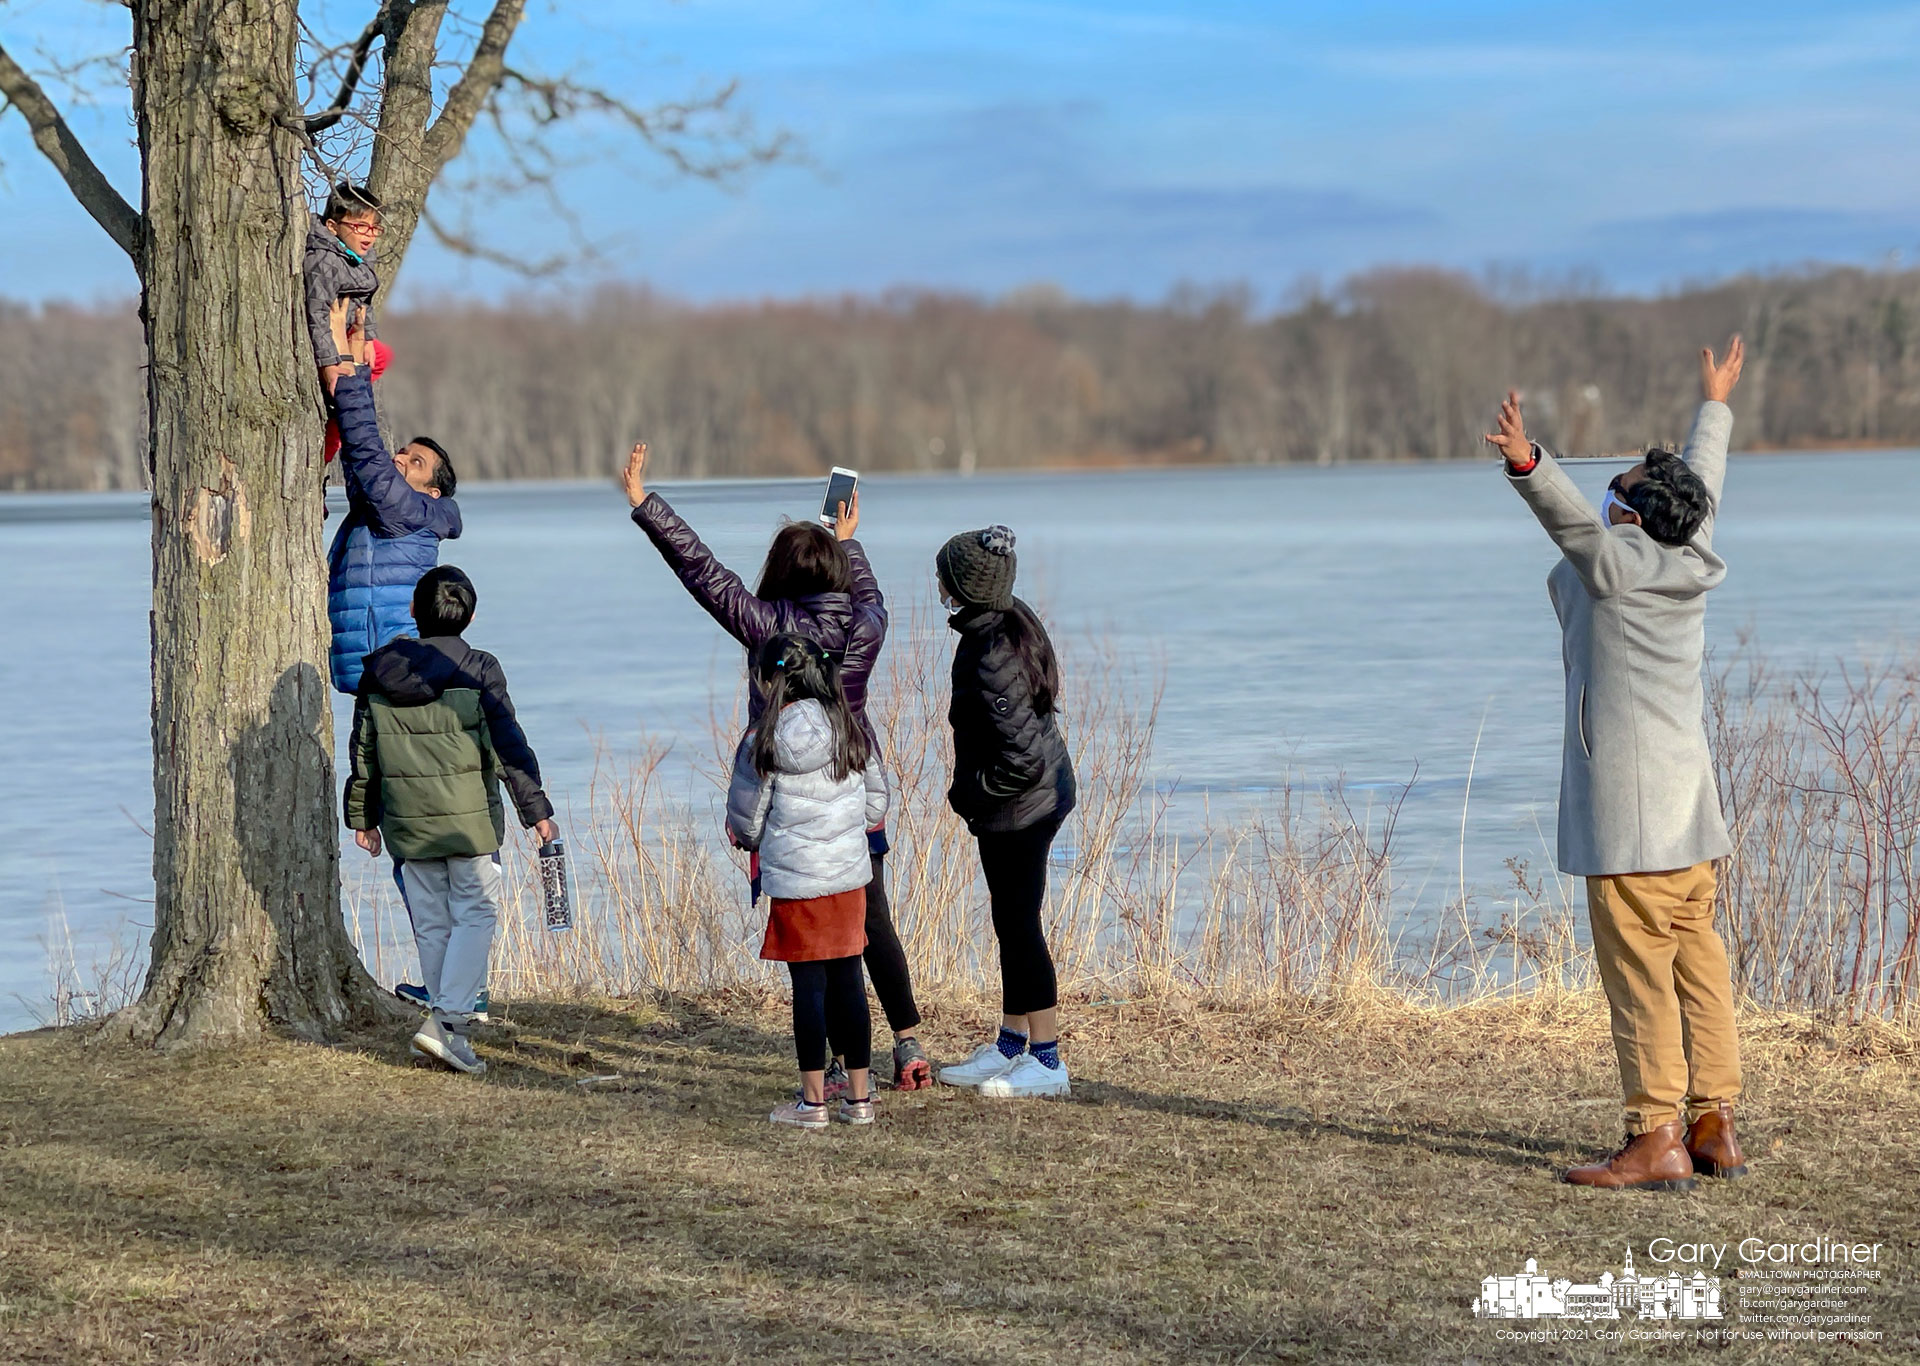 A father lifts his son into the crook of a tree as his family urges the youngster to pose for a photo along the shoreline of Hoover Reservoir. My Final Photo for Feb. 27, 2021.